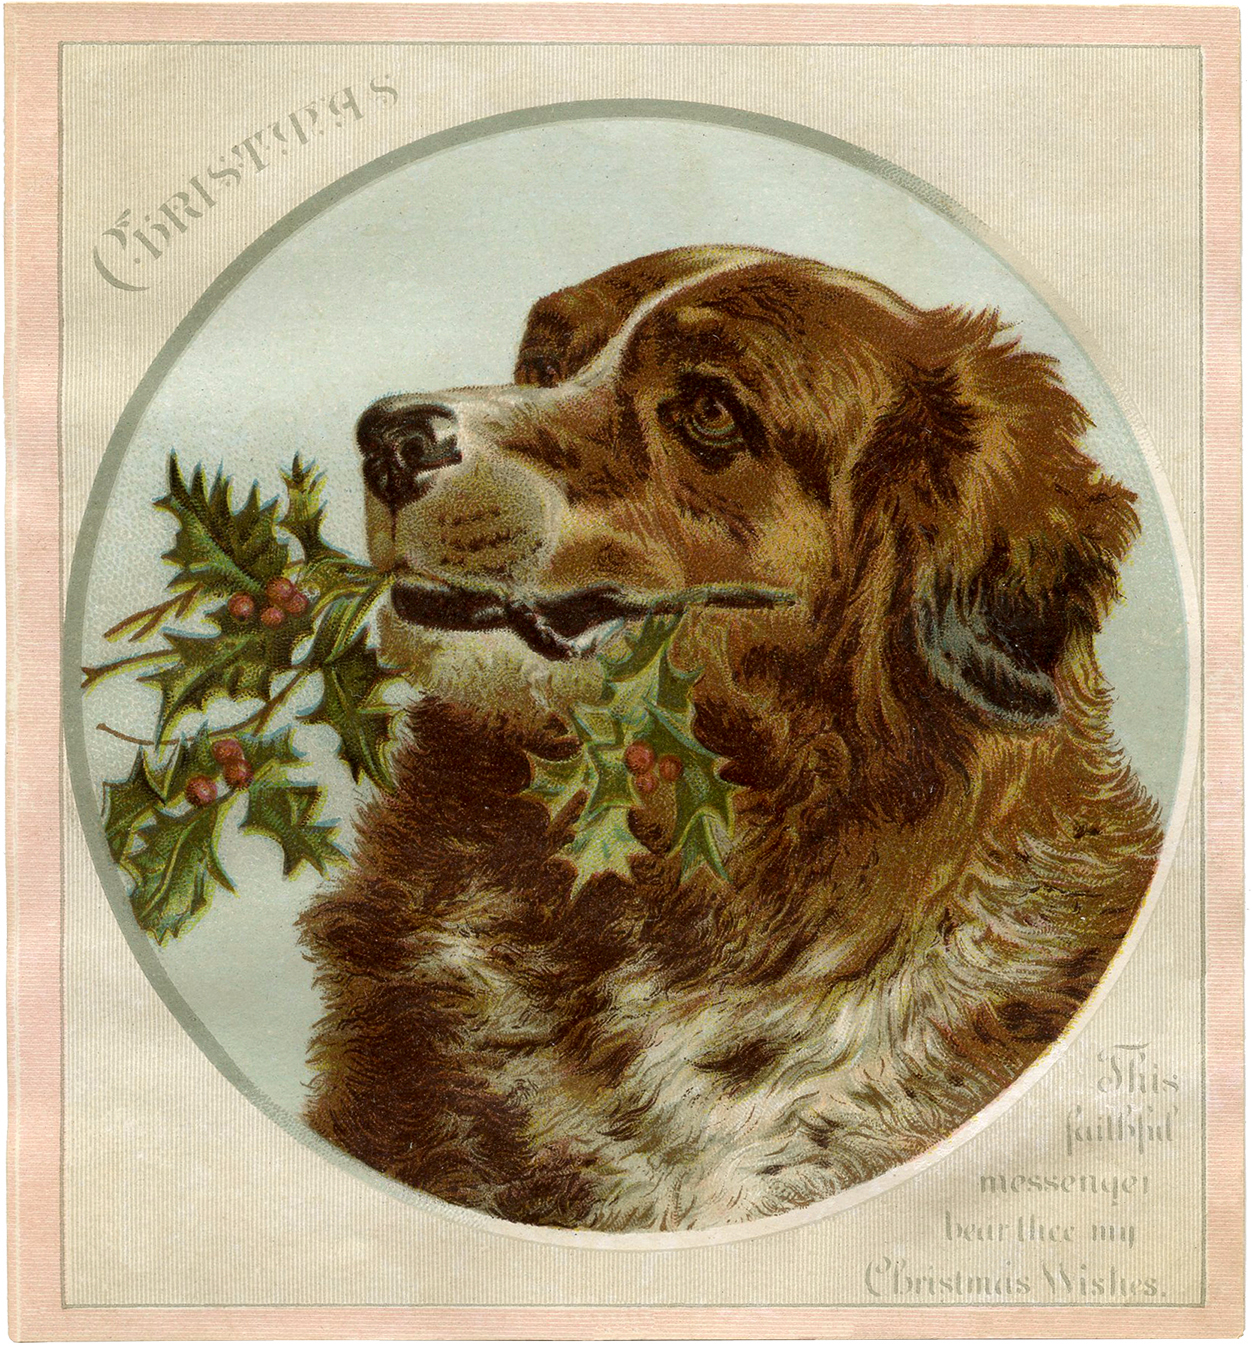 10 Vintage Christmas Dog Images! - The Graphics Fairy